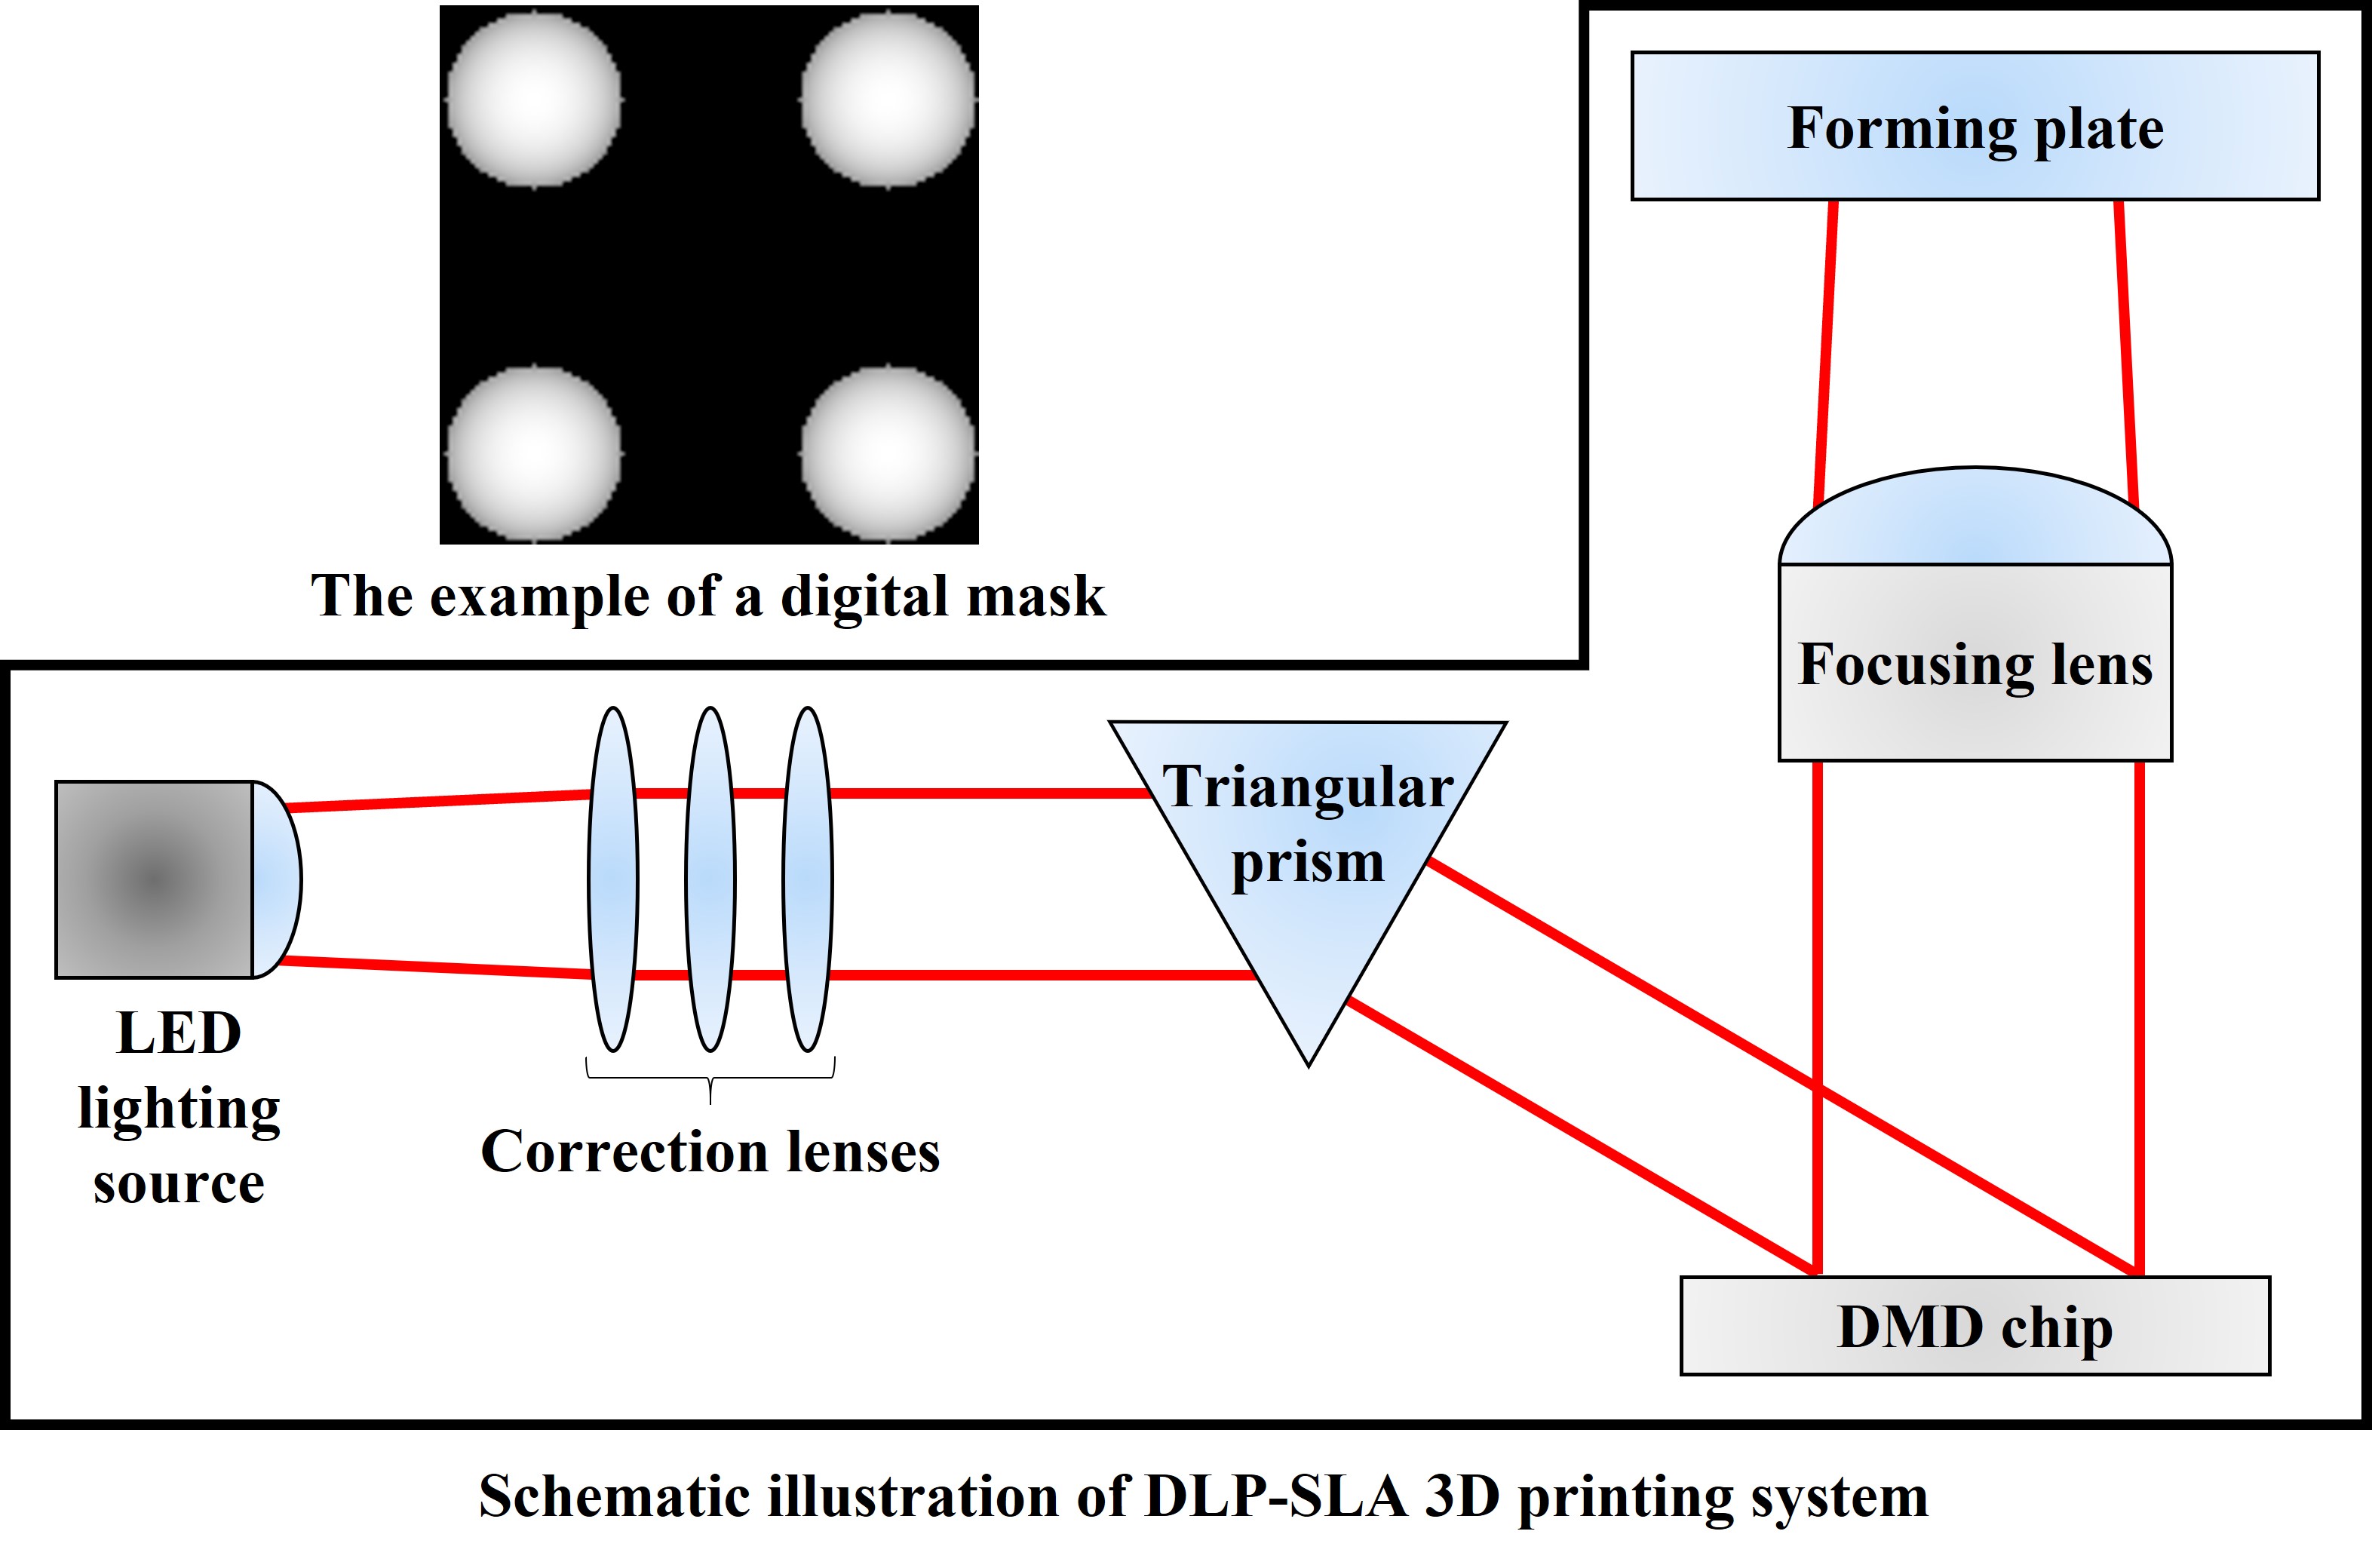 Integrating Digital Grayscale, Defocus MethodNewly Developed Photopolymer to Stereolithography 3D Printing Process to Rapidly Manufacture Microlens Array with High Optical Performance